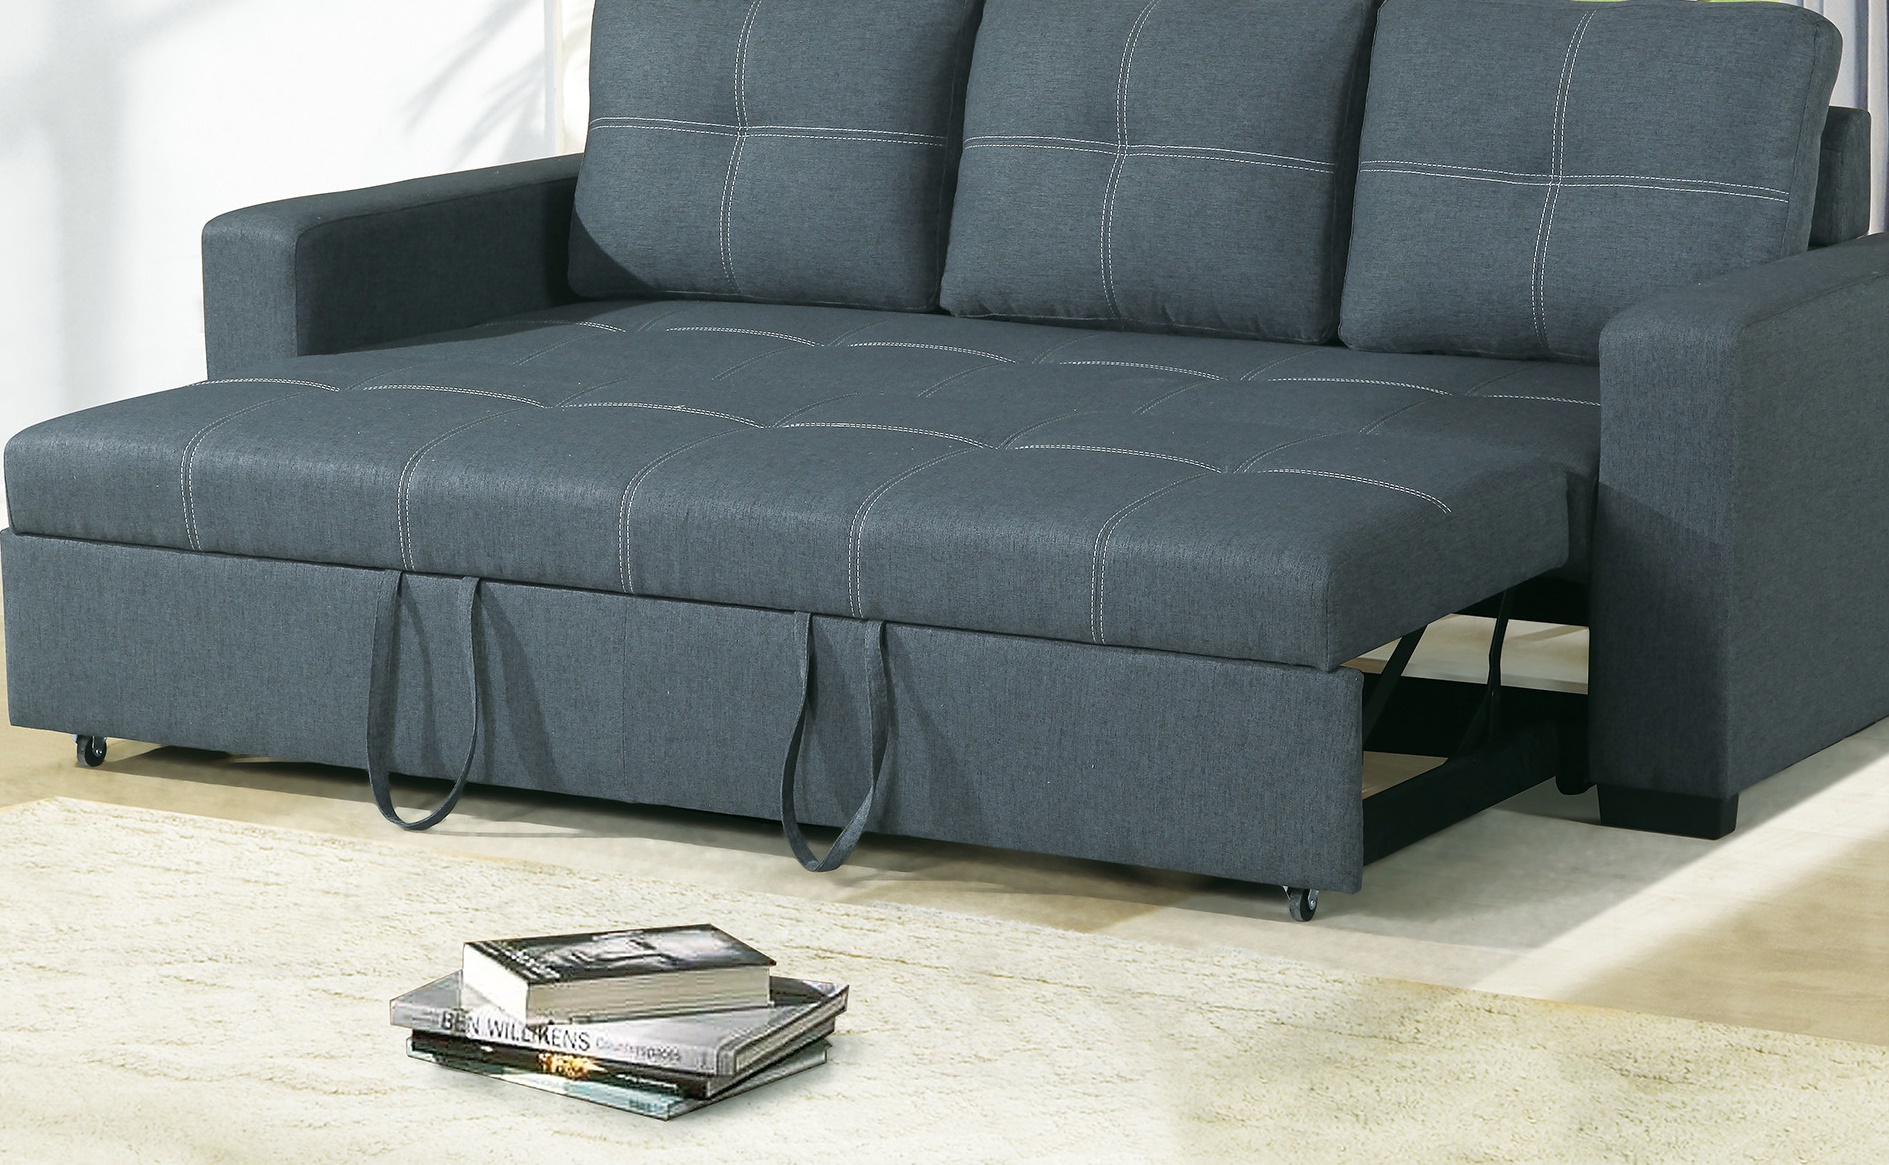 Convertible Sofa Bed Bobkona Living Room Sofa w Pull out Bed Accent Stitching Comfort Couch Blue Grey Polyfiber - image 4 of 5